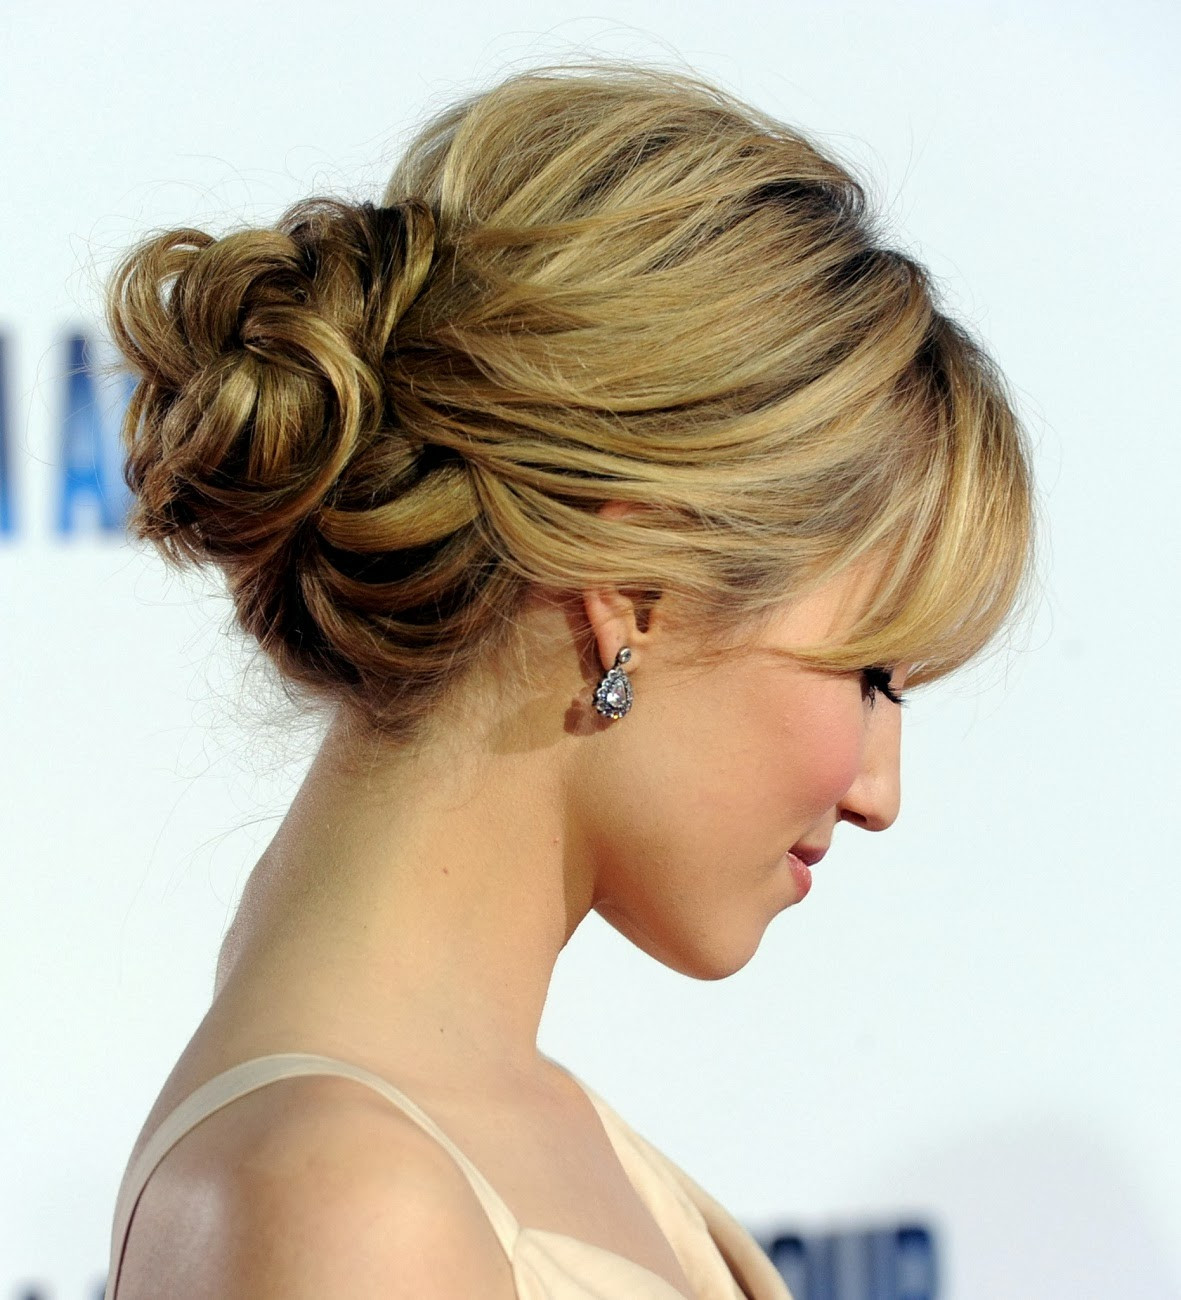 Prom Hairstyles For Thin Hair
 New Best Hairstyles for Long Hair for Prom Hair Fashion